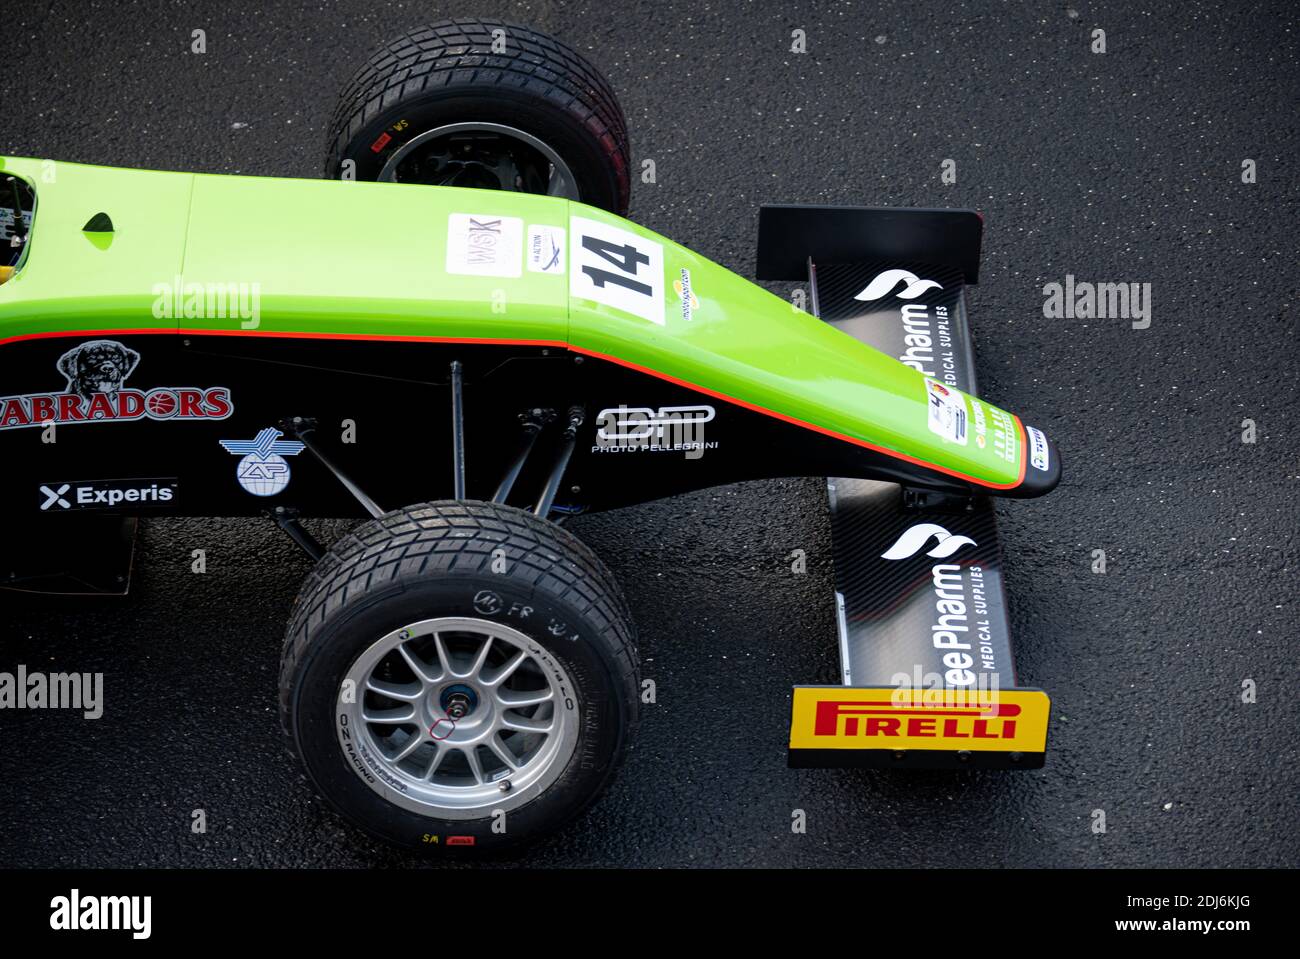 Pirelli wet racing tire on motorsport single seater car  high angle view close up Stock Photo